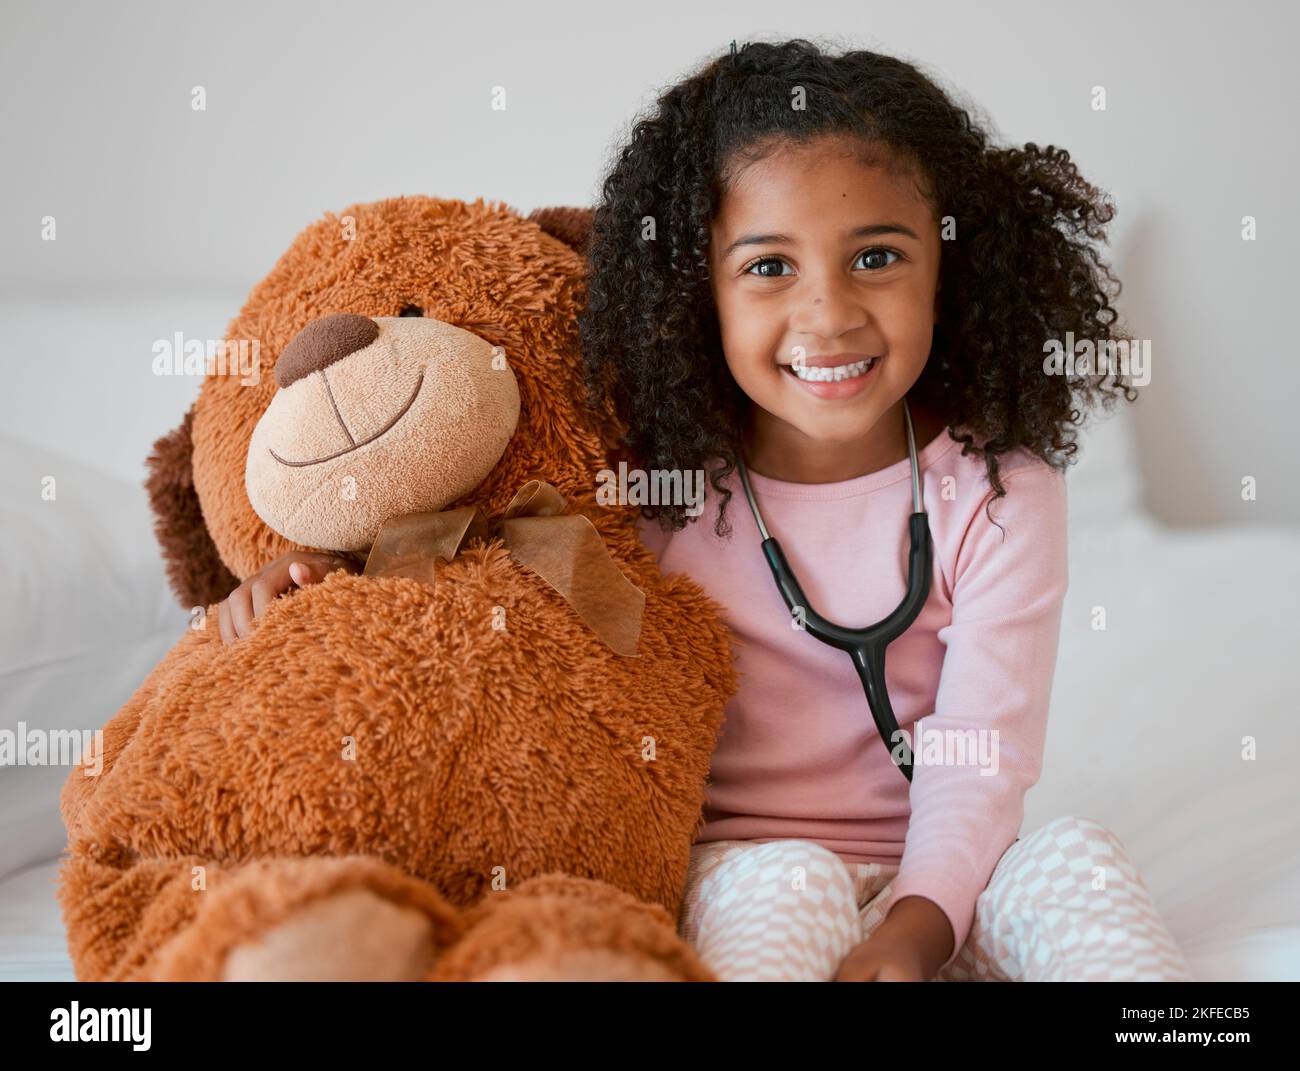 Download A Girl Holding A Stuffed Animal In Front Of A House Wallpaper